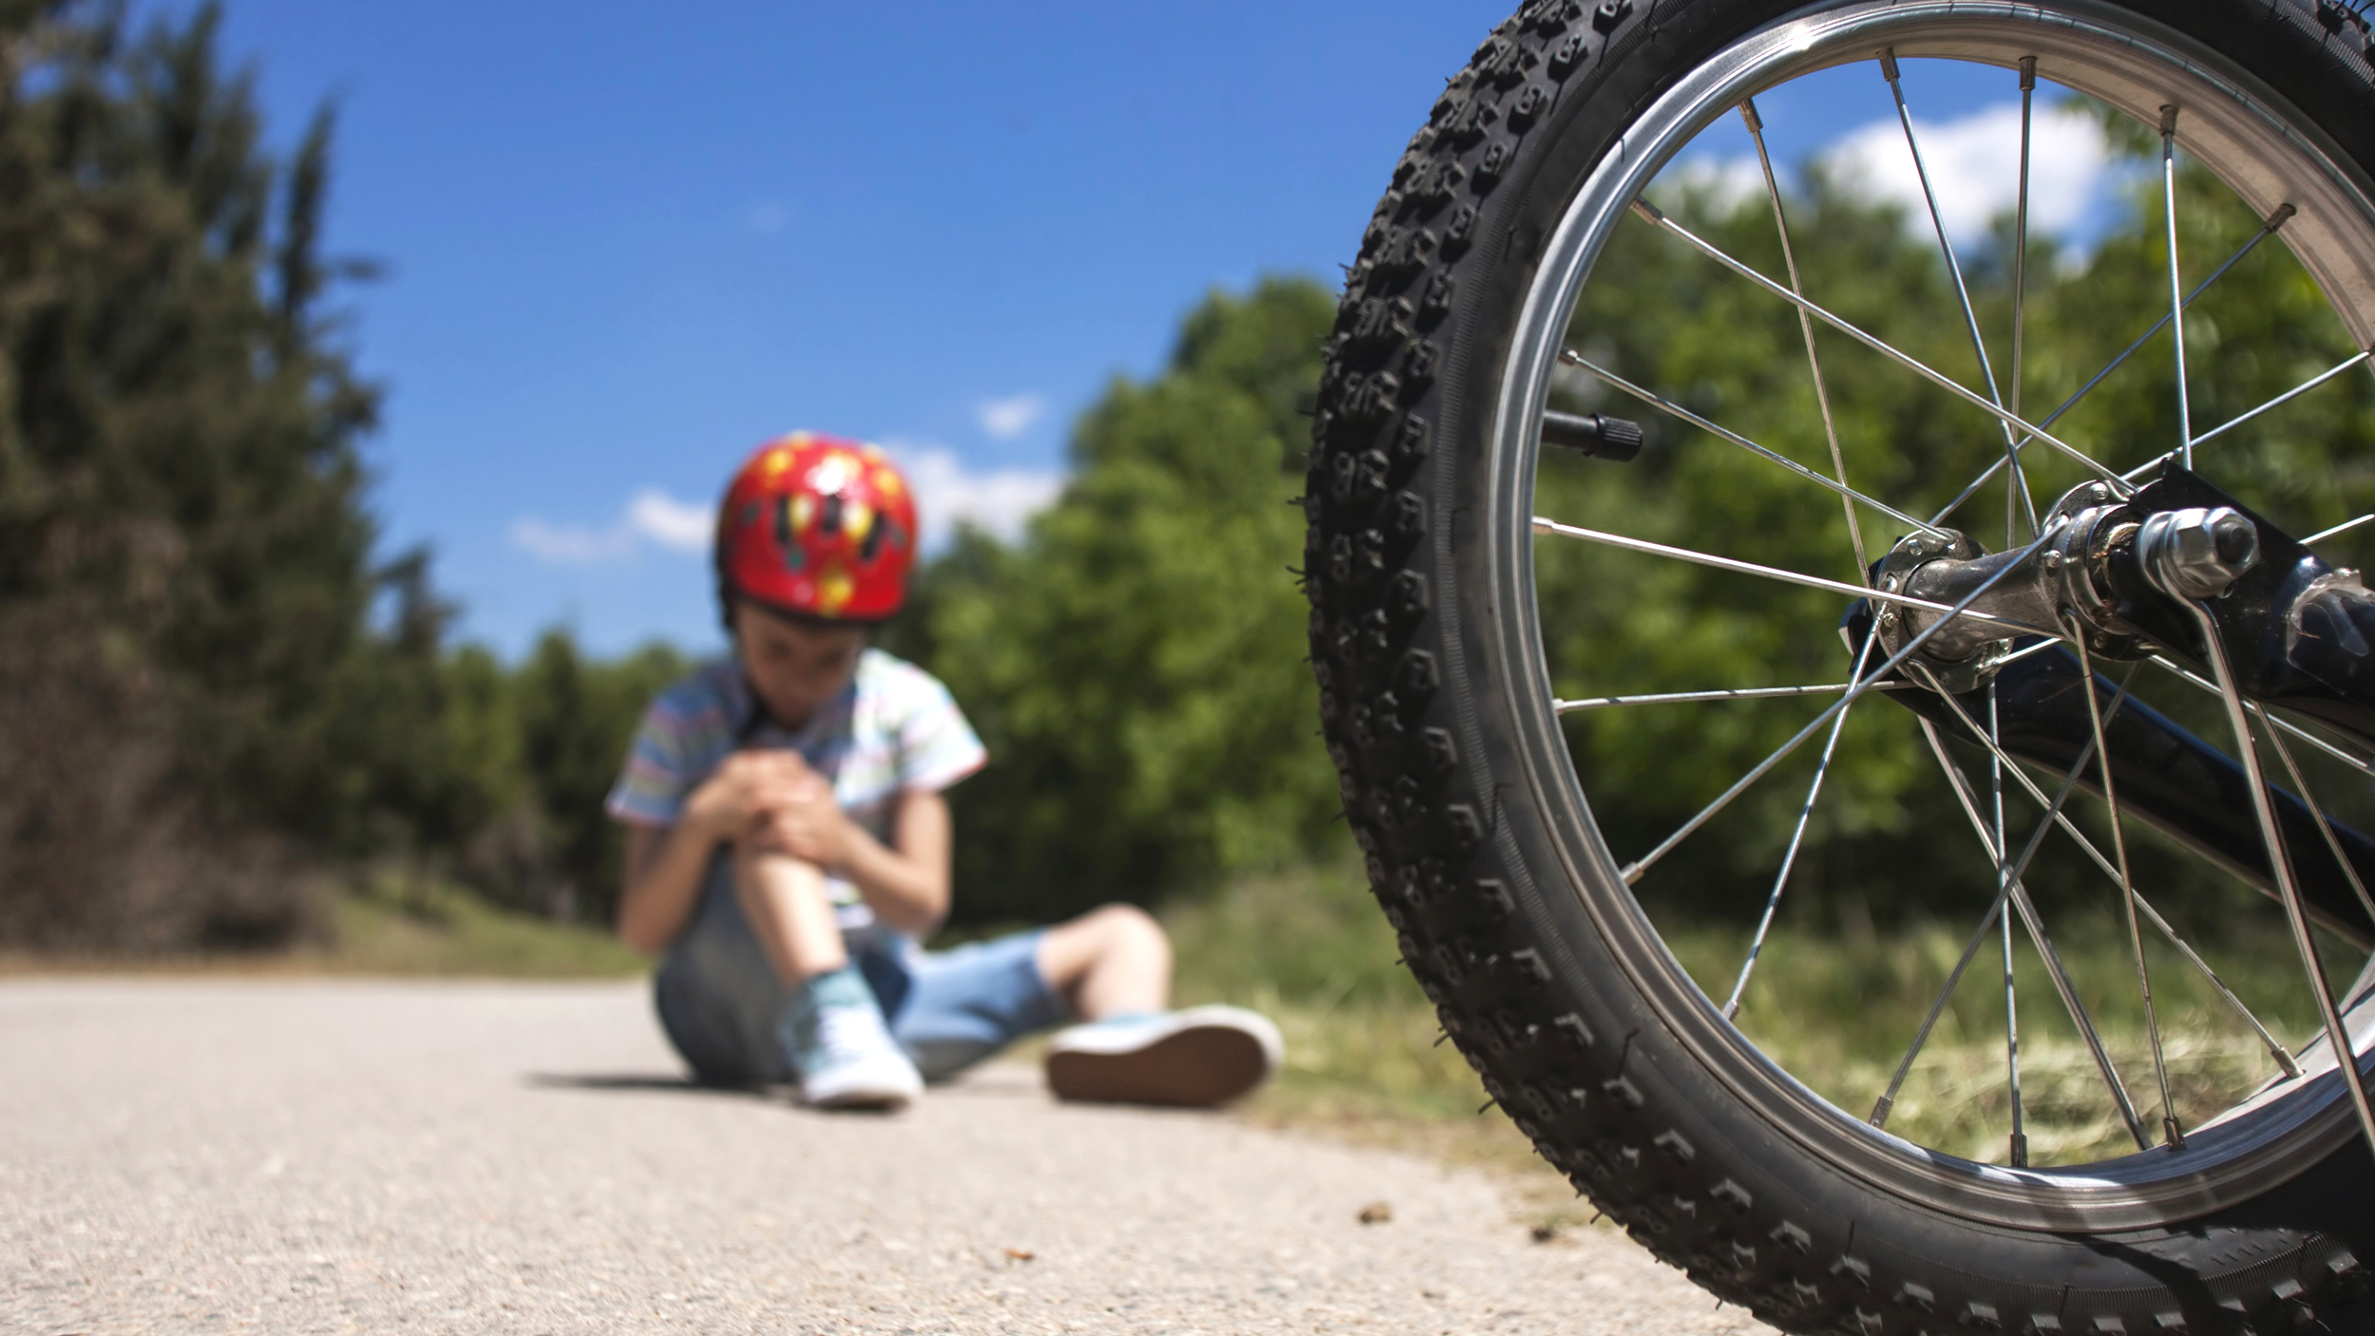 Rear End Accident Lawyer Dans How A Kid In A Minor Bike Accident Incurs A $19 000 Medical Bill Grey Law